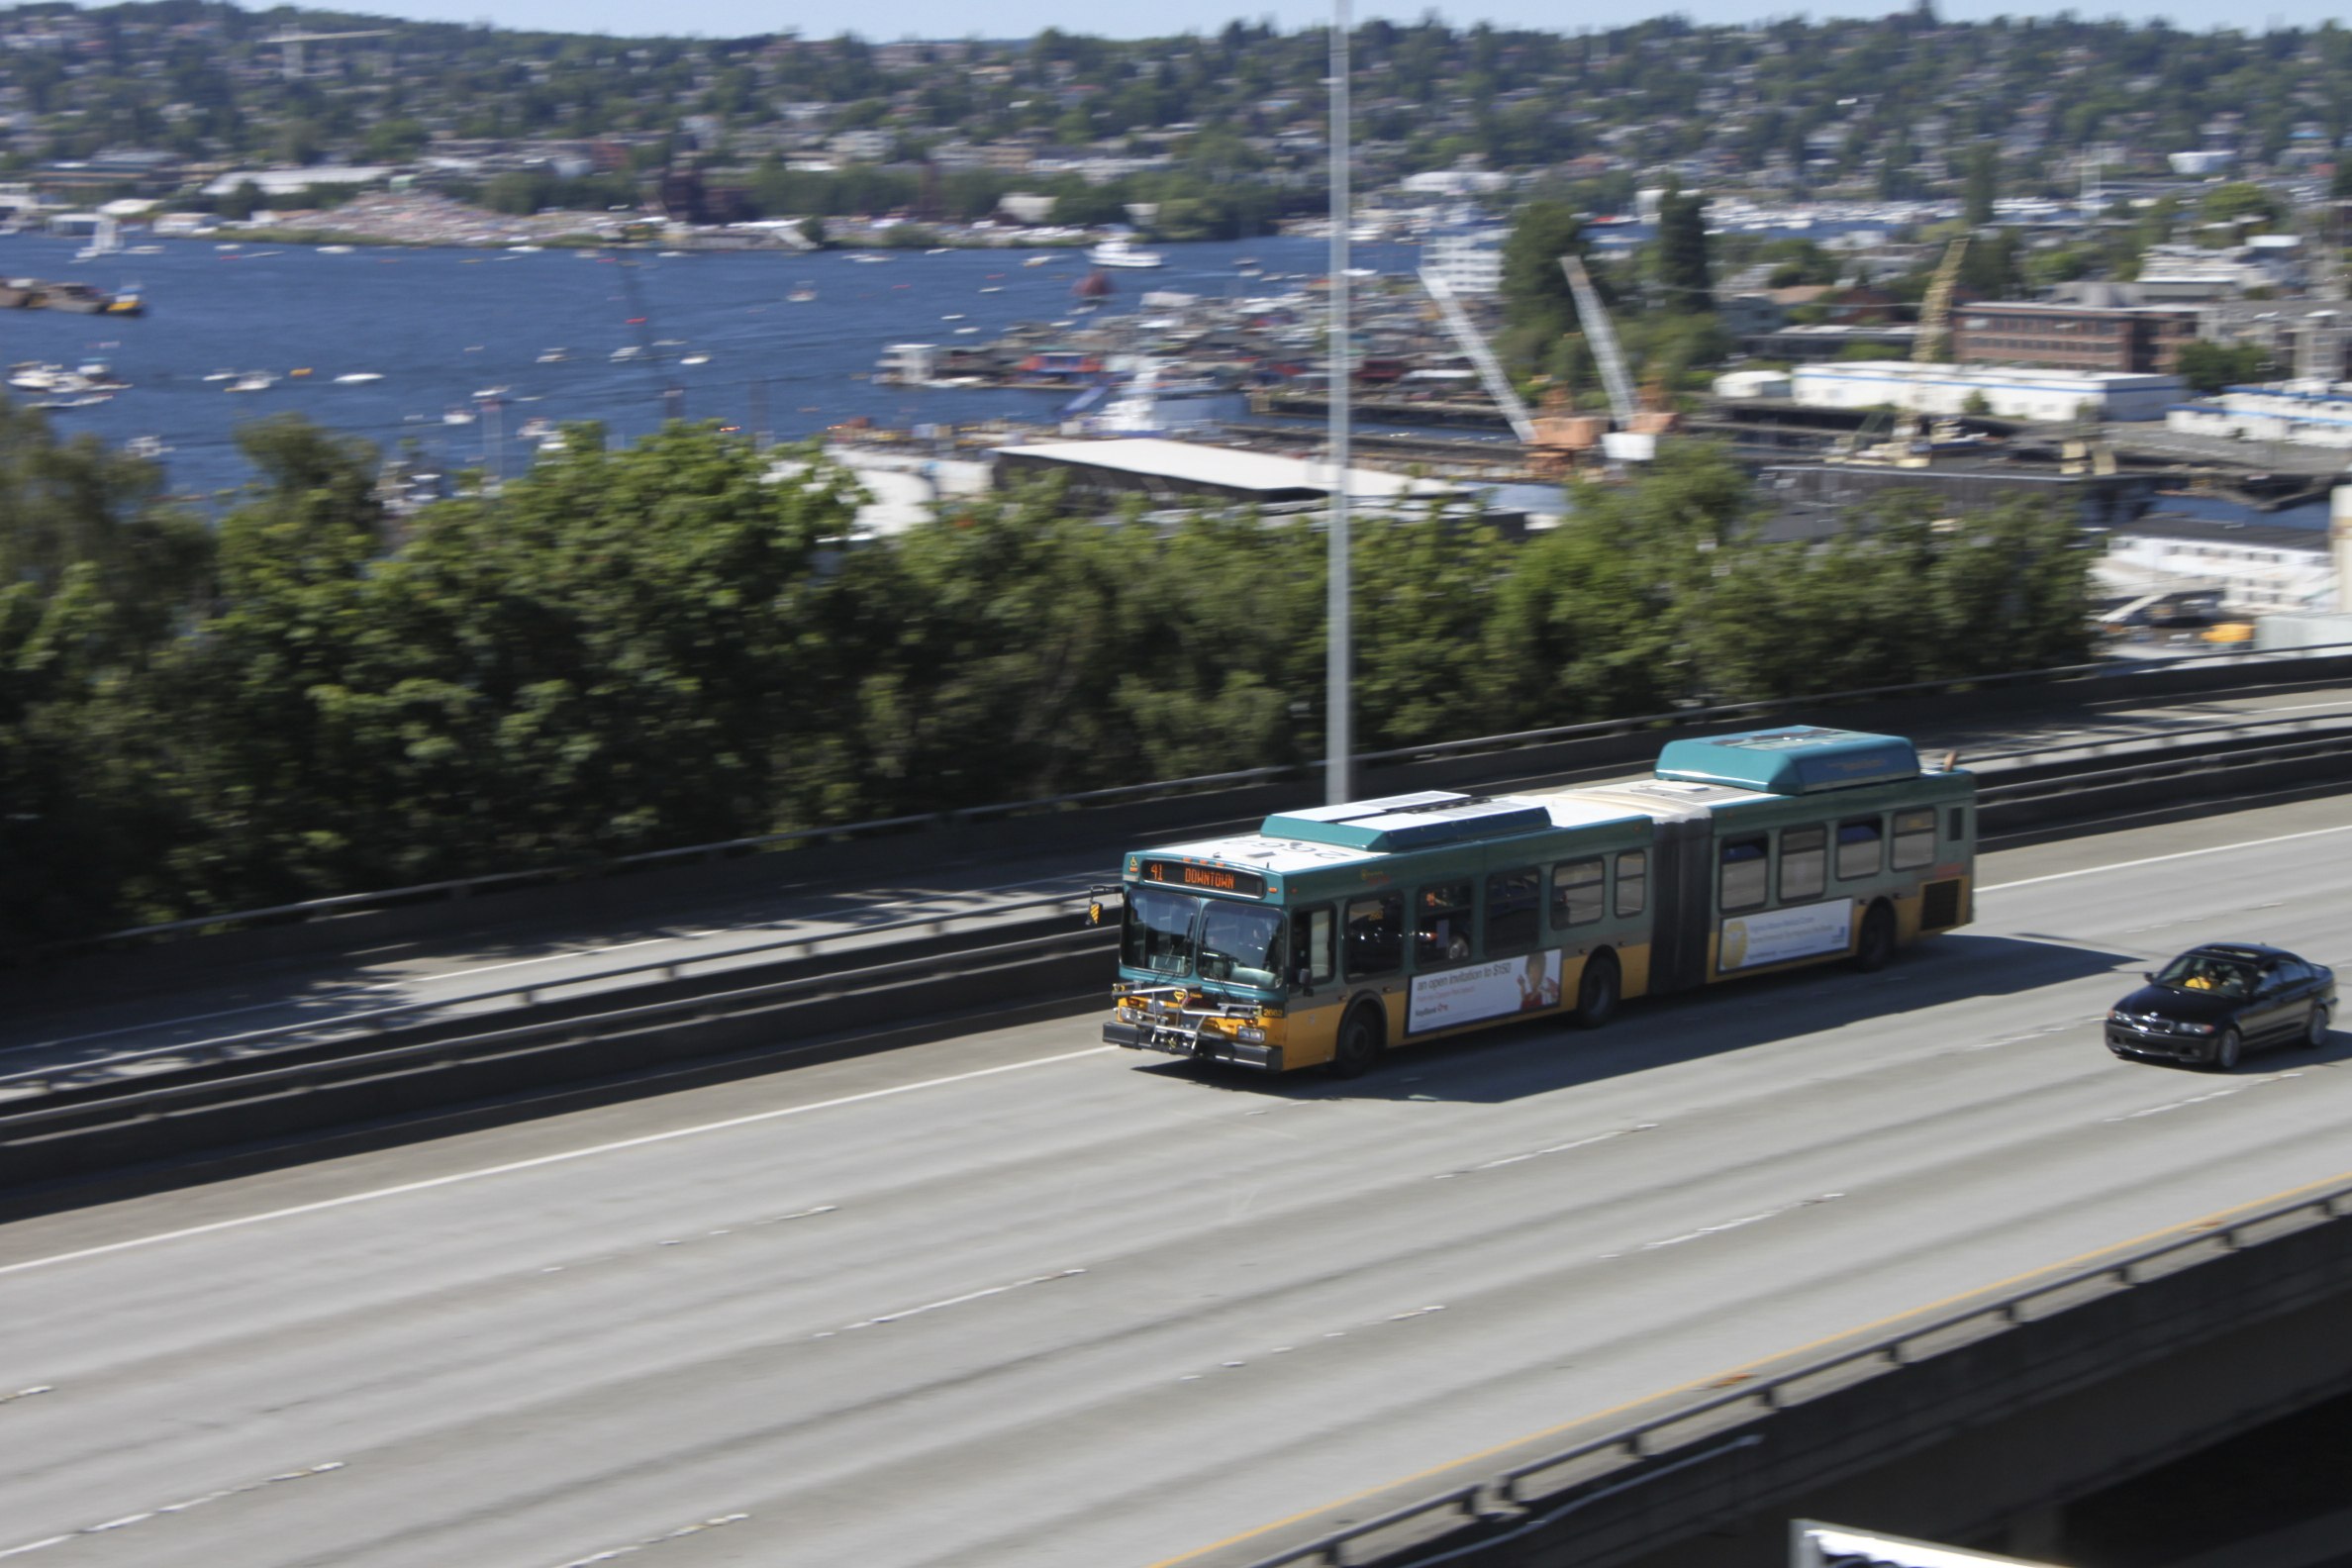 An extended bus drives on an empty freeway near a bay on a sunny day.